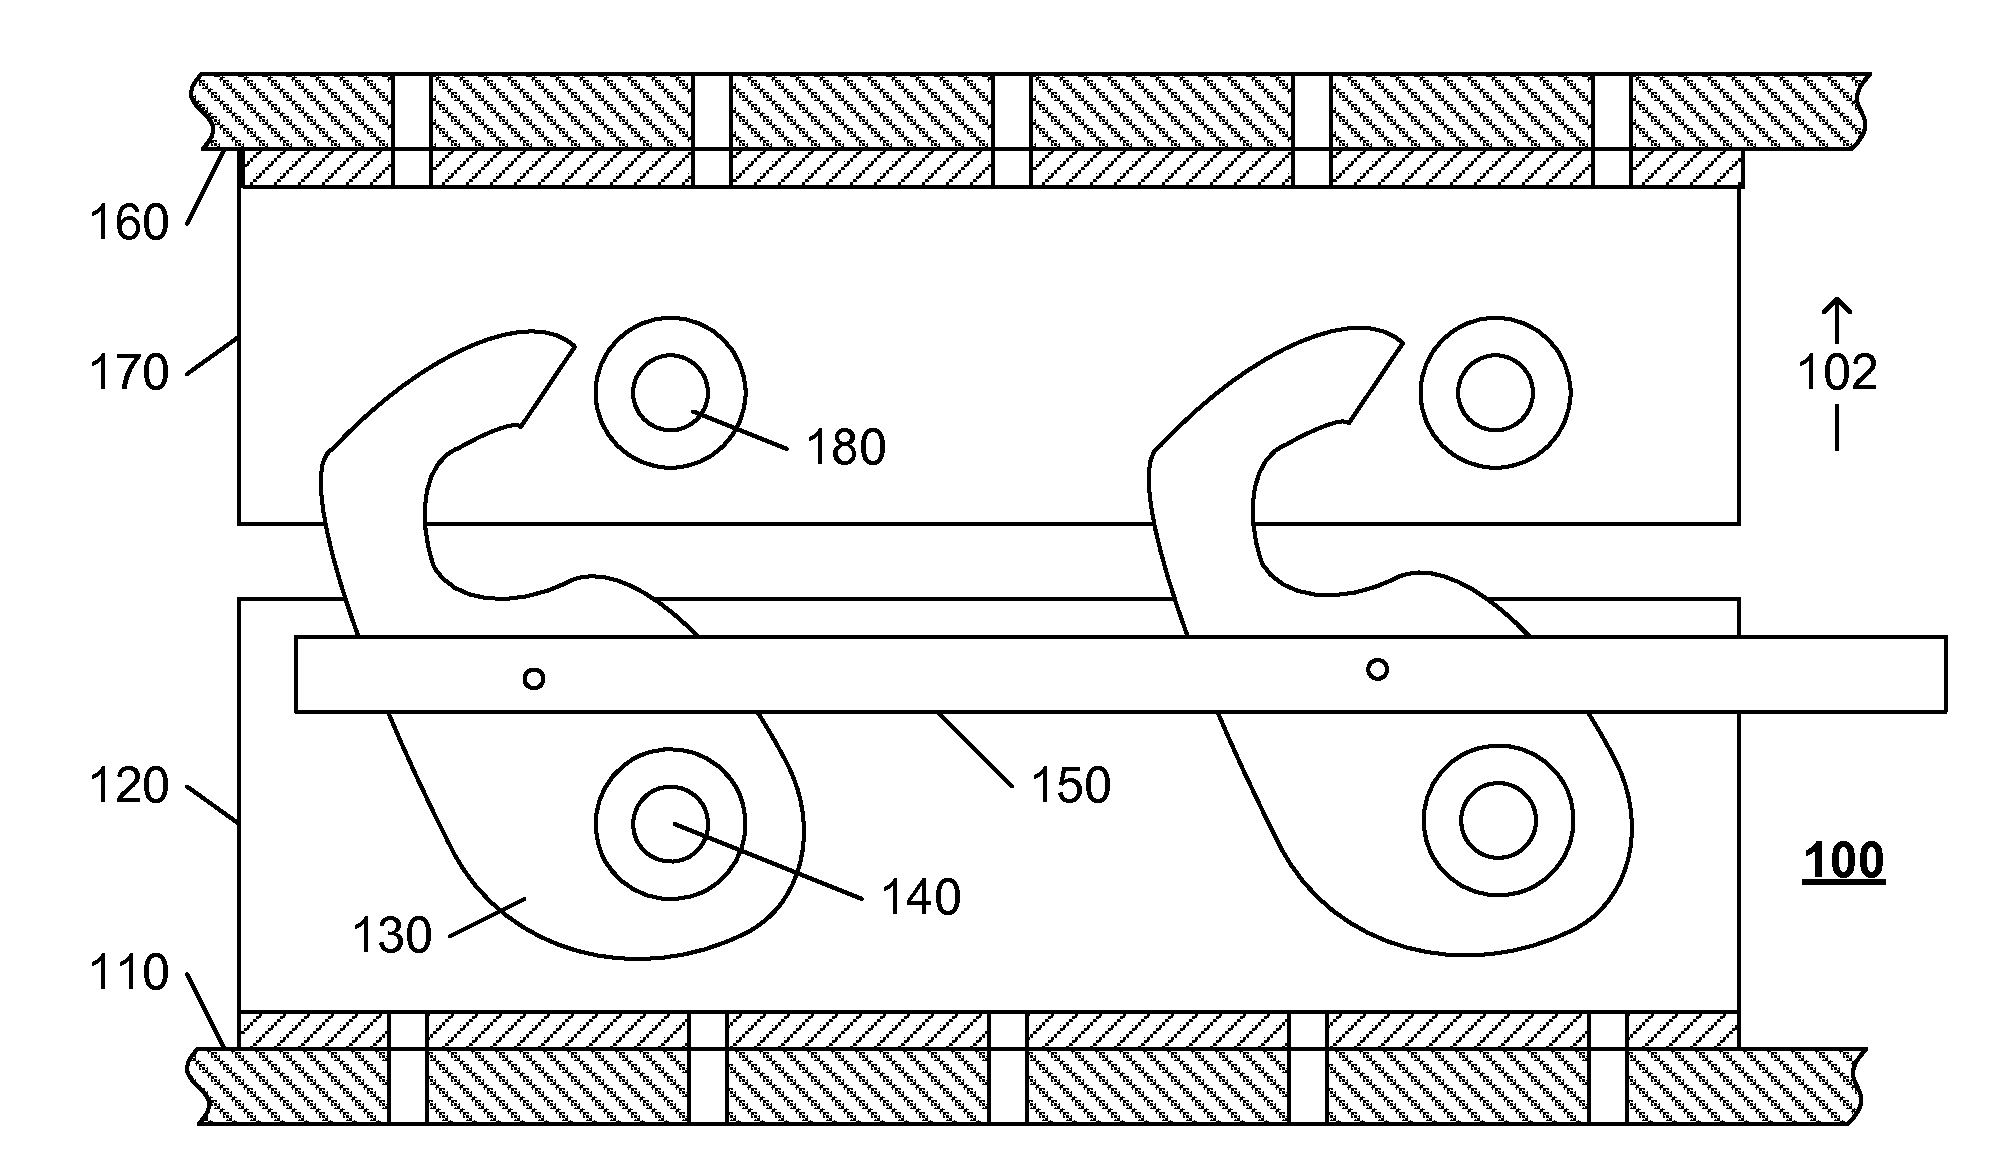 Latching separation system